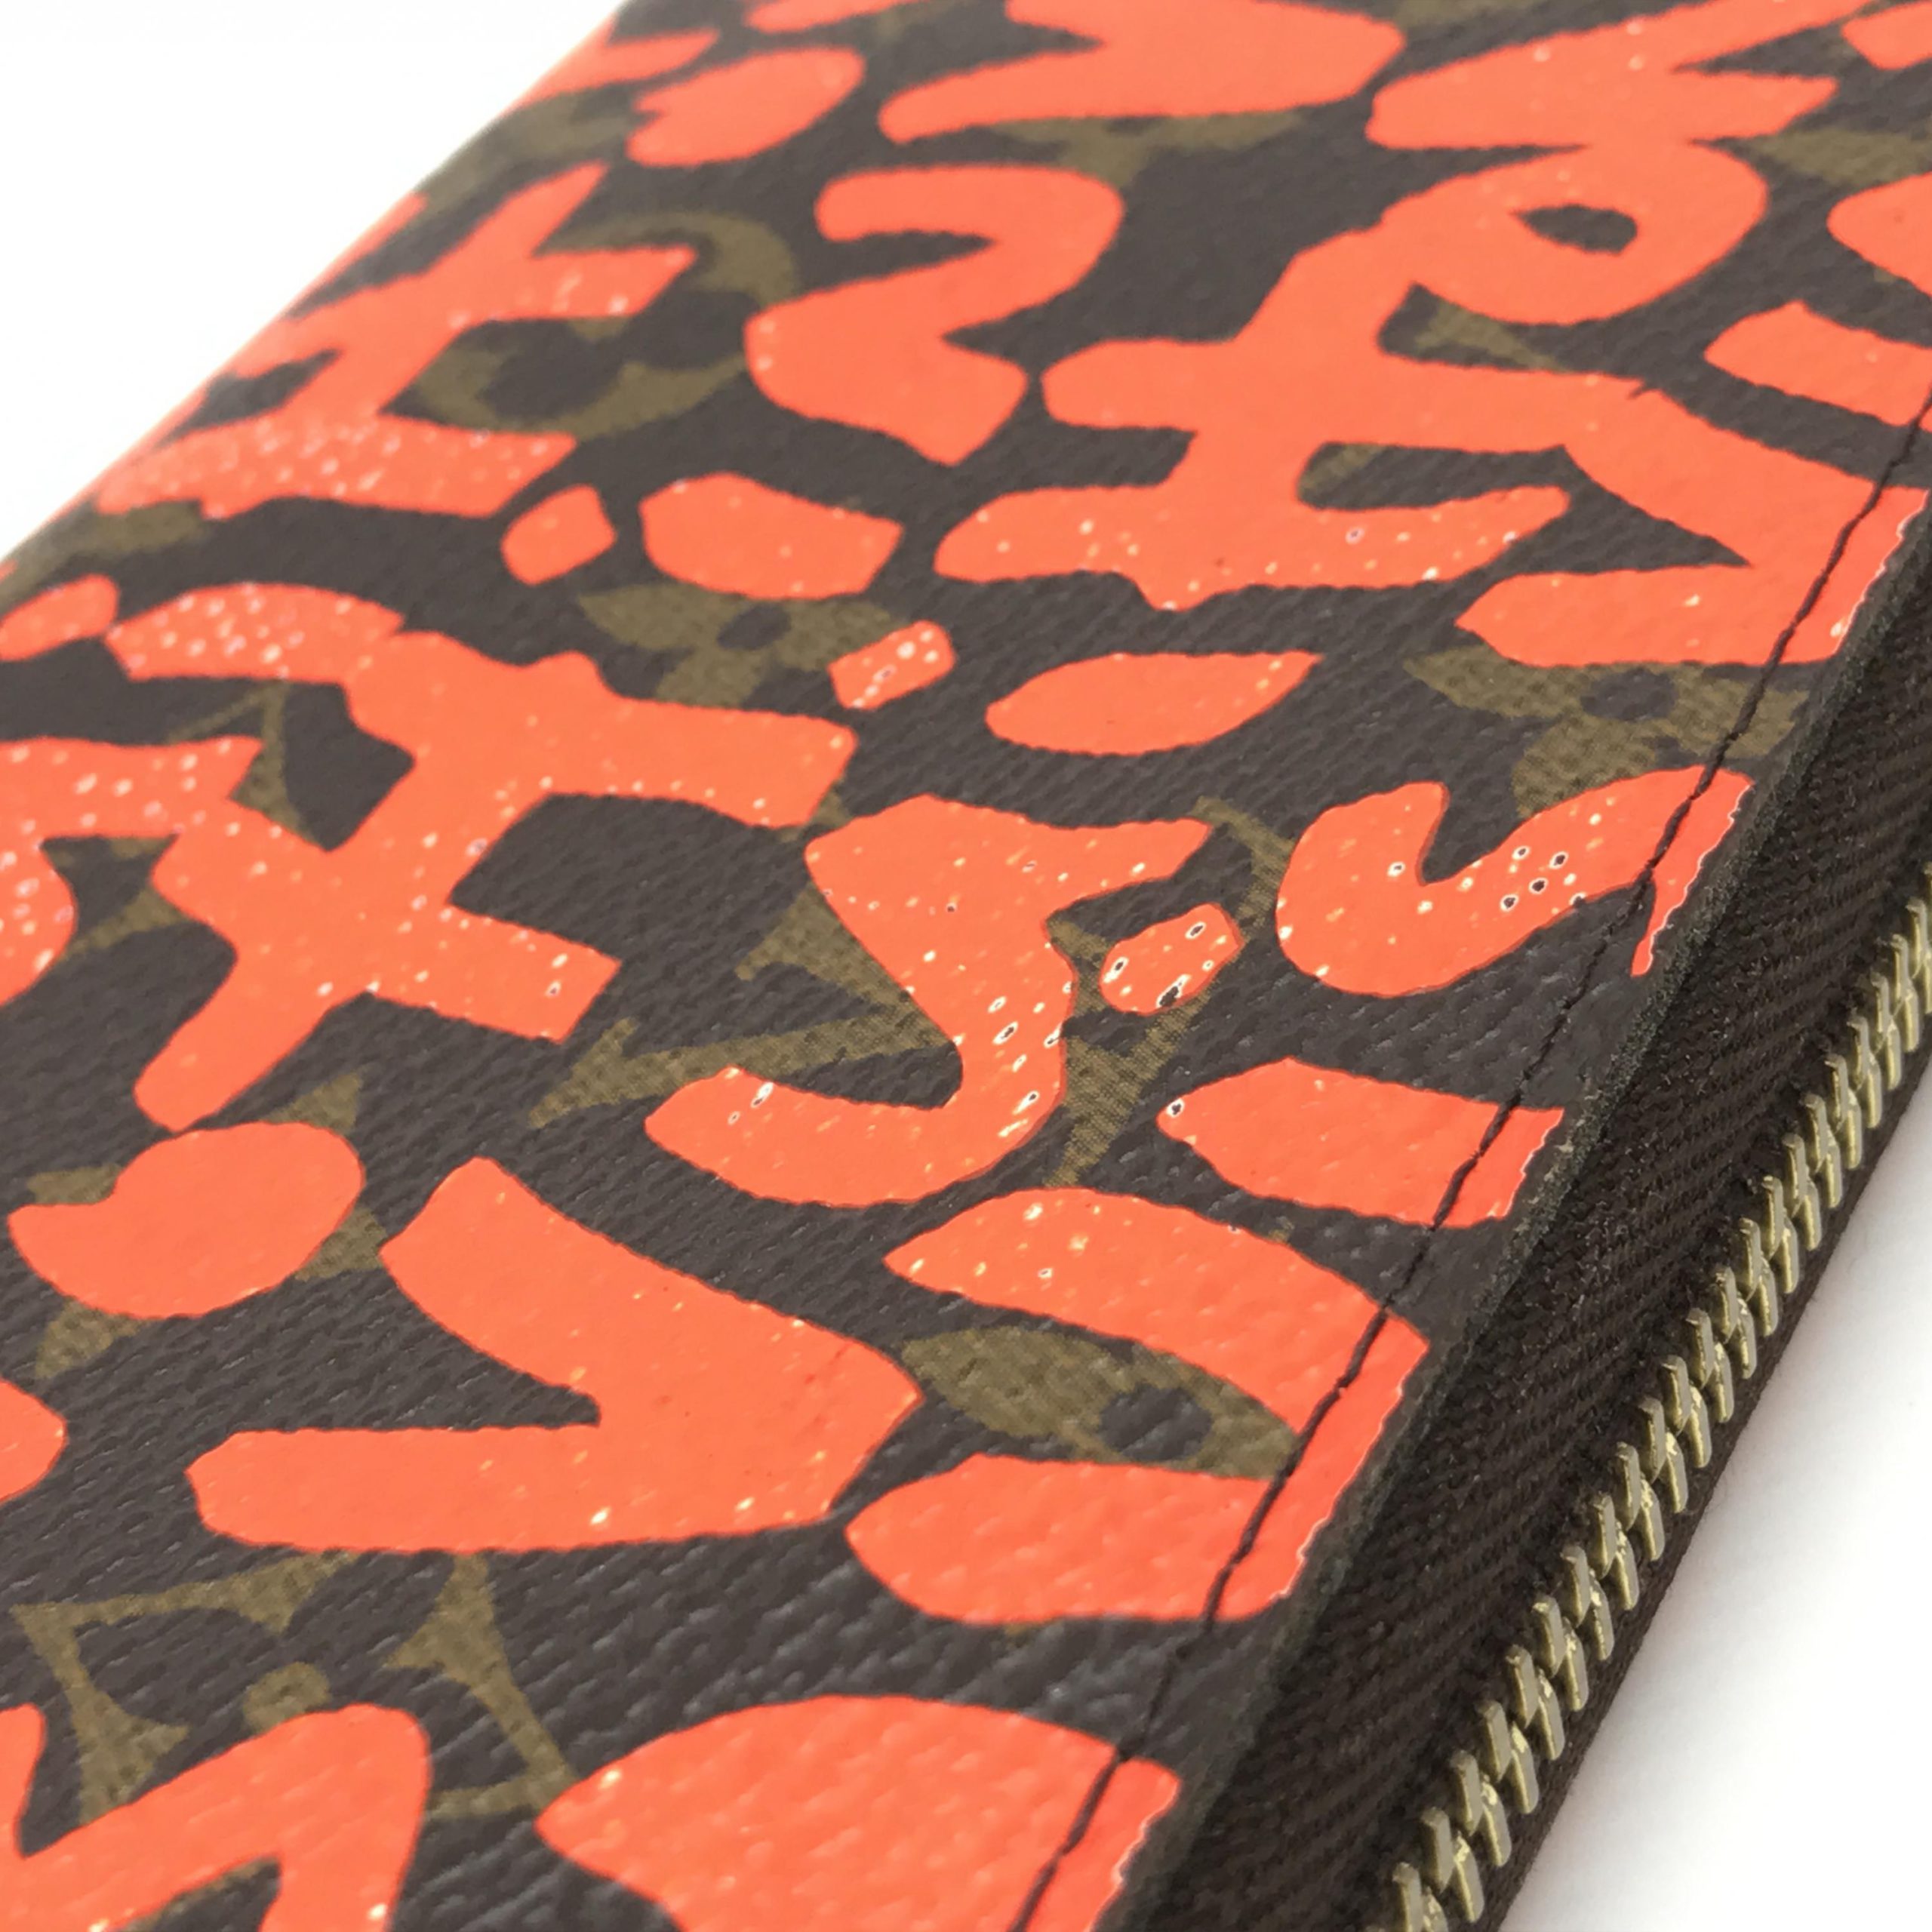 LOUIS VUITTON LIMITED EDITION STEPHEN SPROUSE ZIPPY WALLET – The